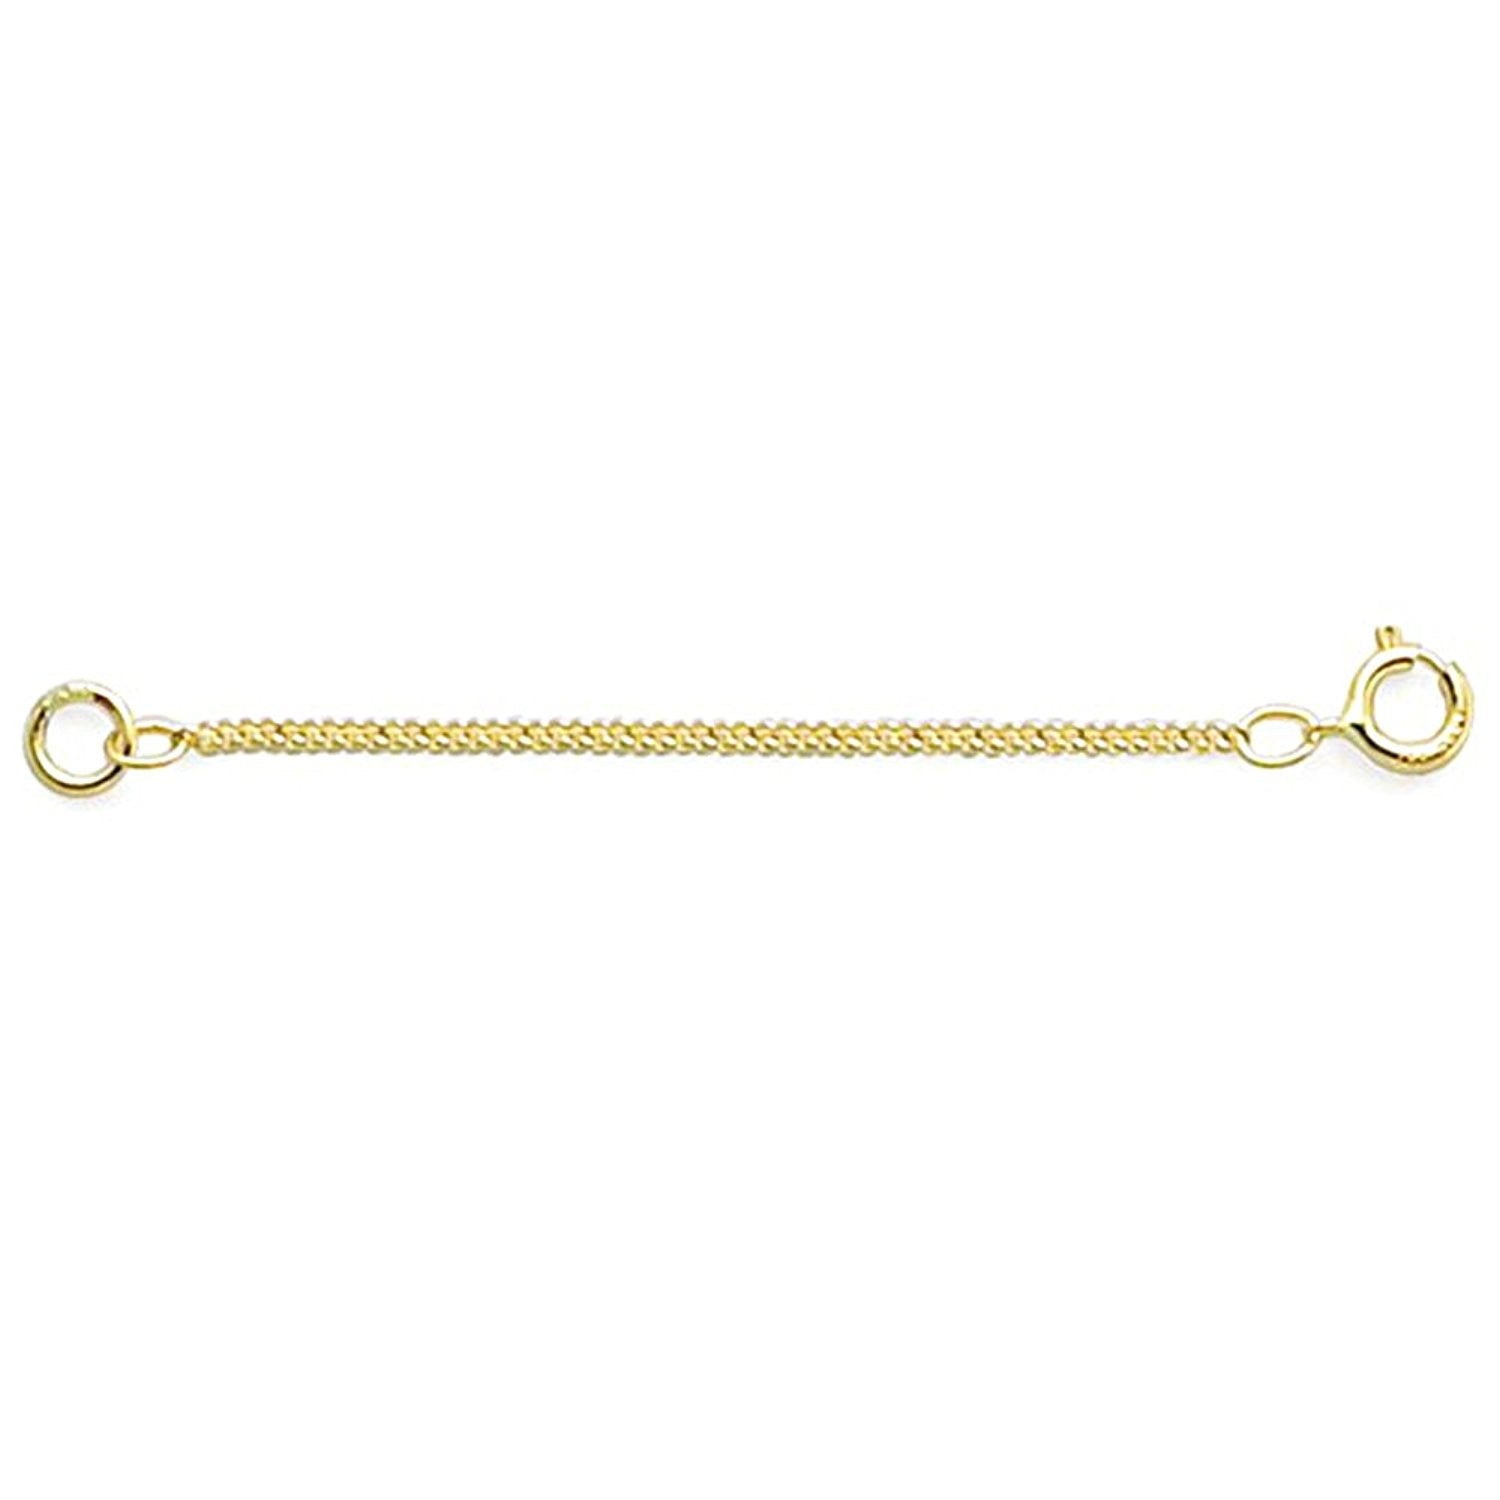 5 Inch Necklace Extender